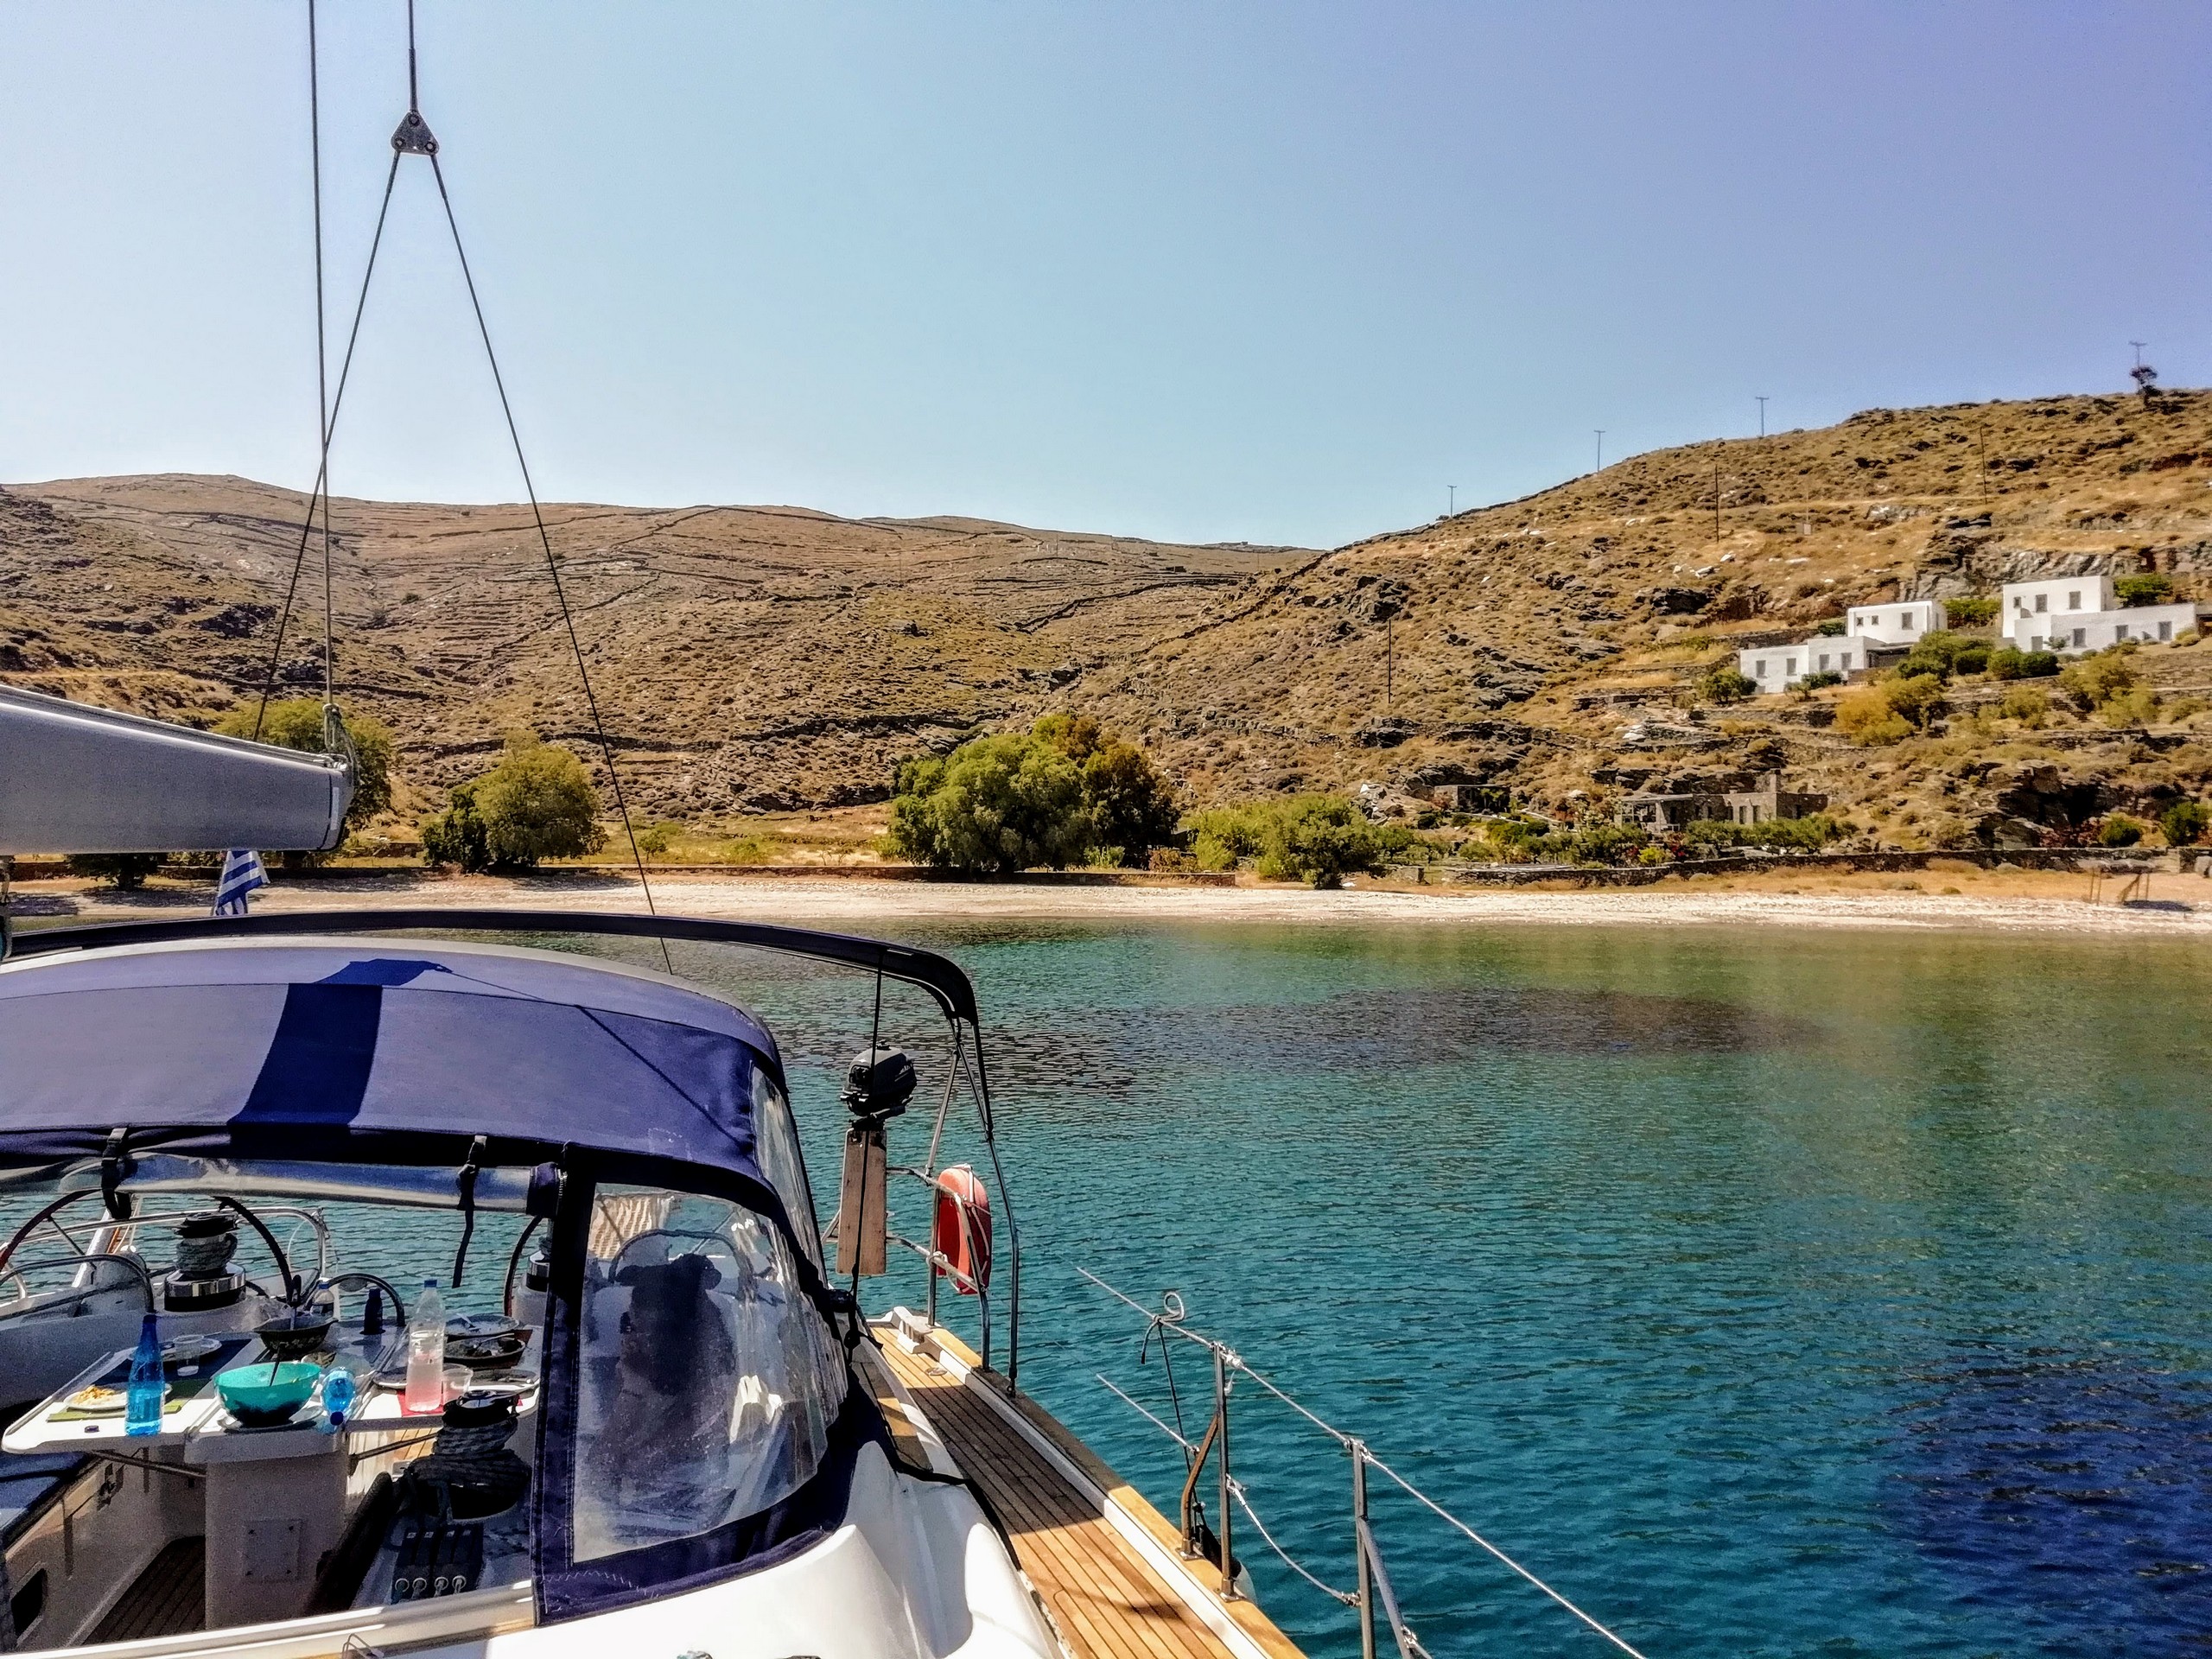 Kythnos shoreline as seen from the sailing boat